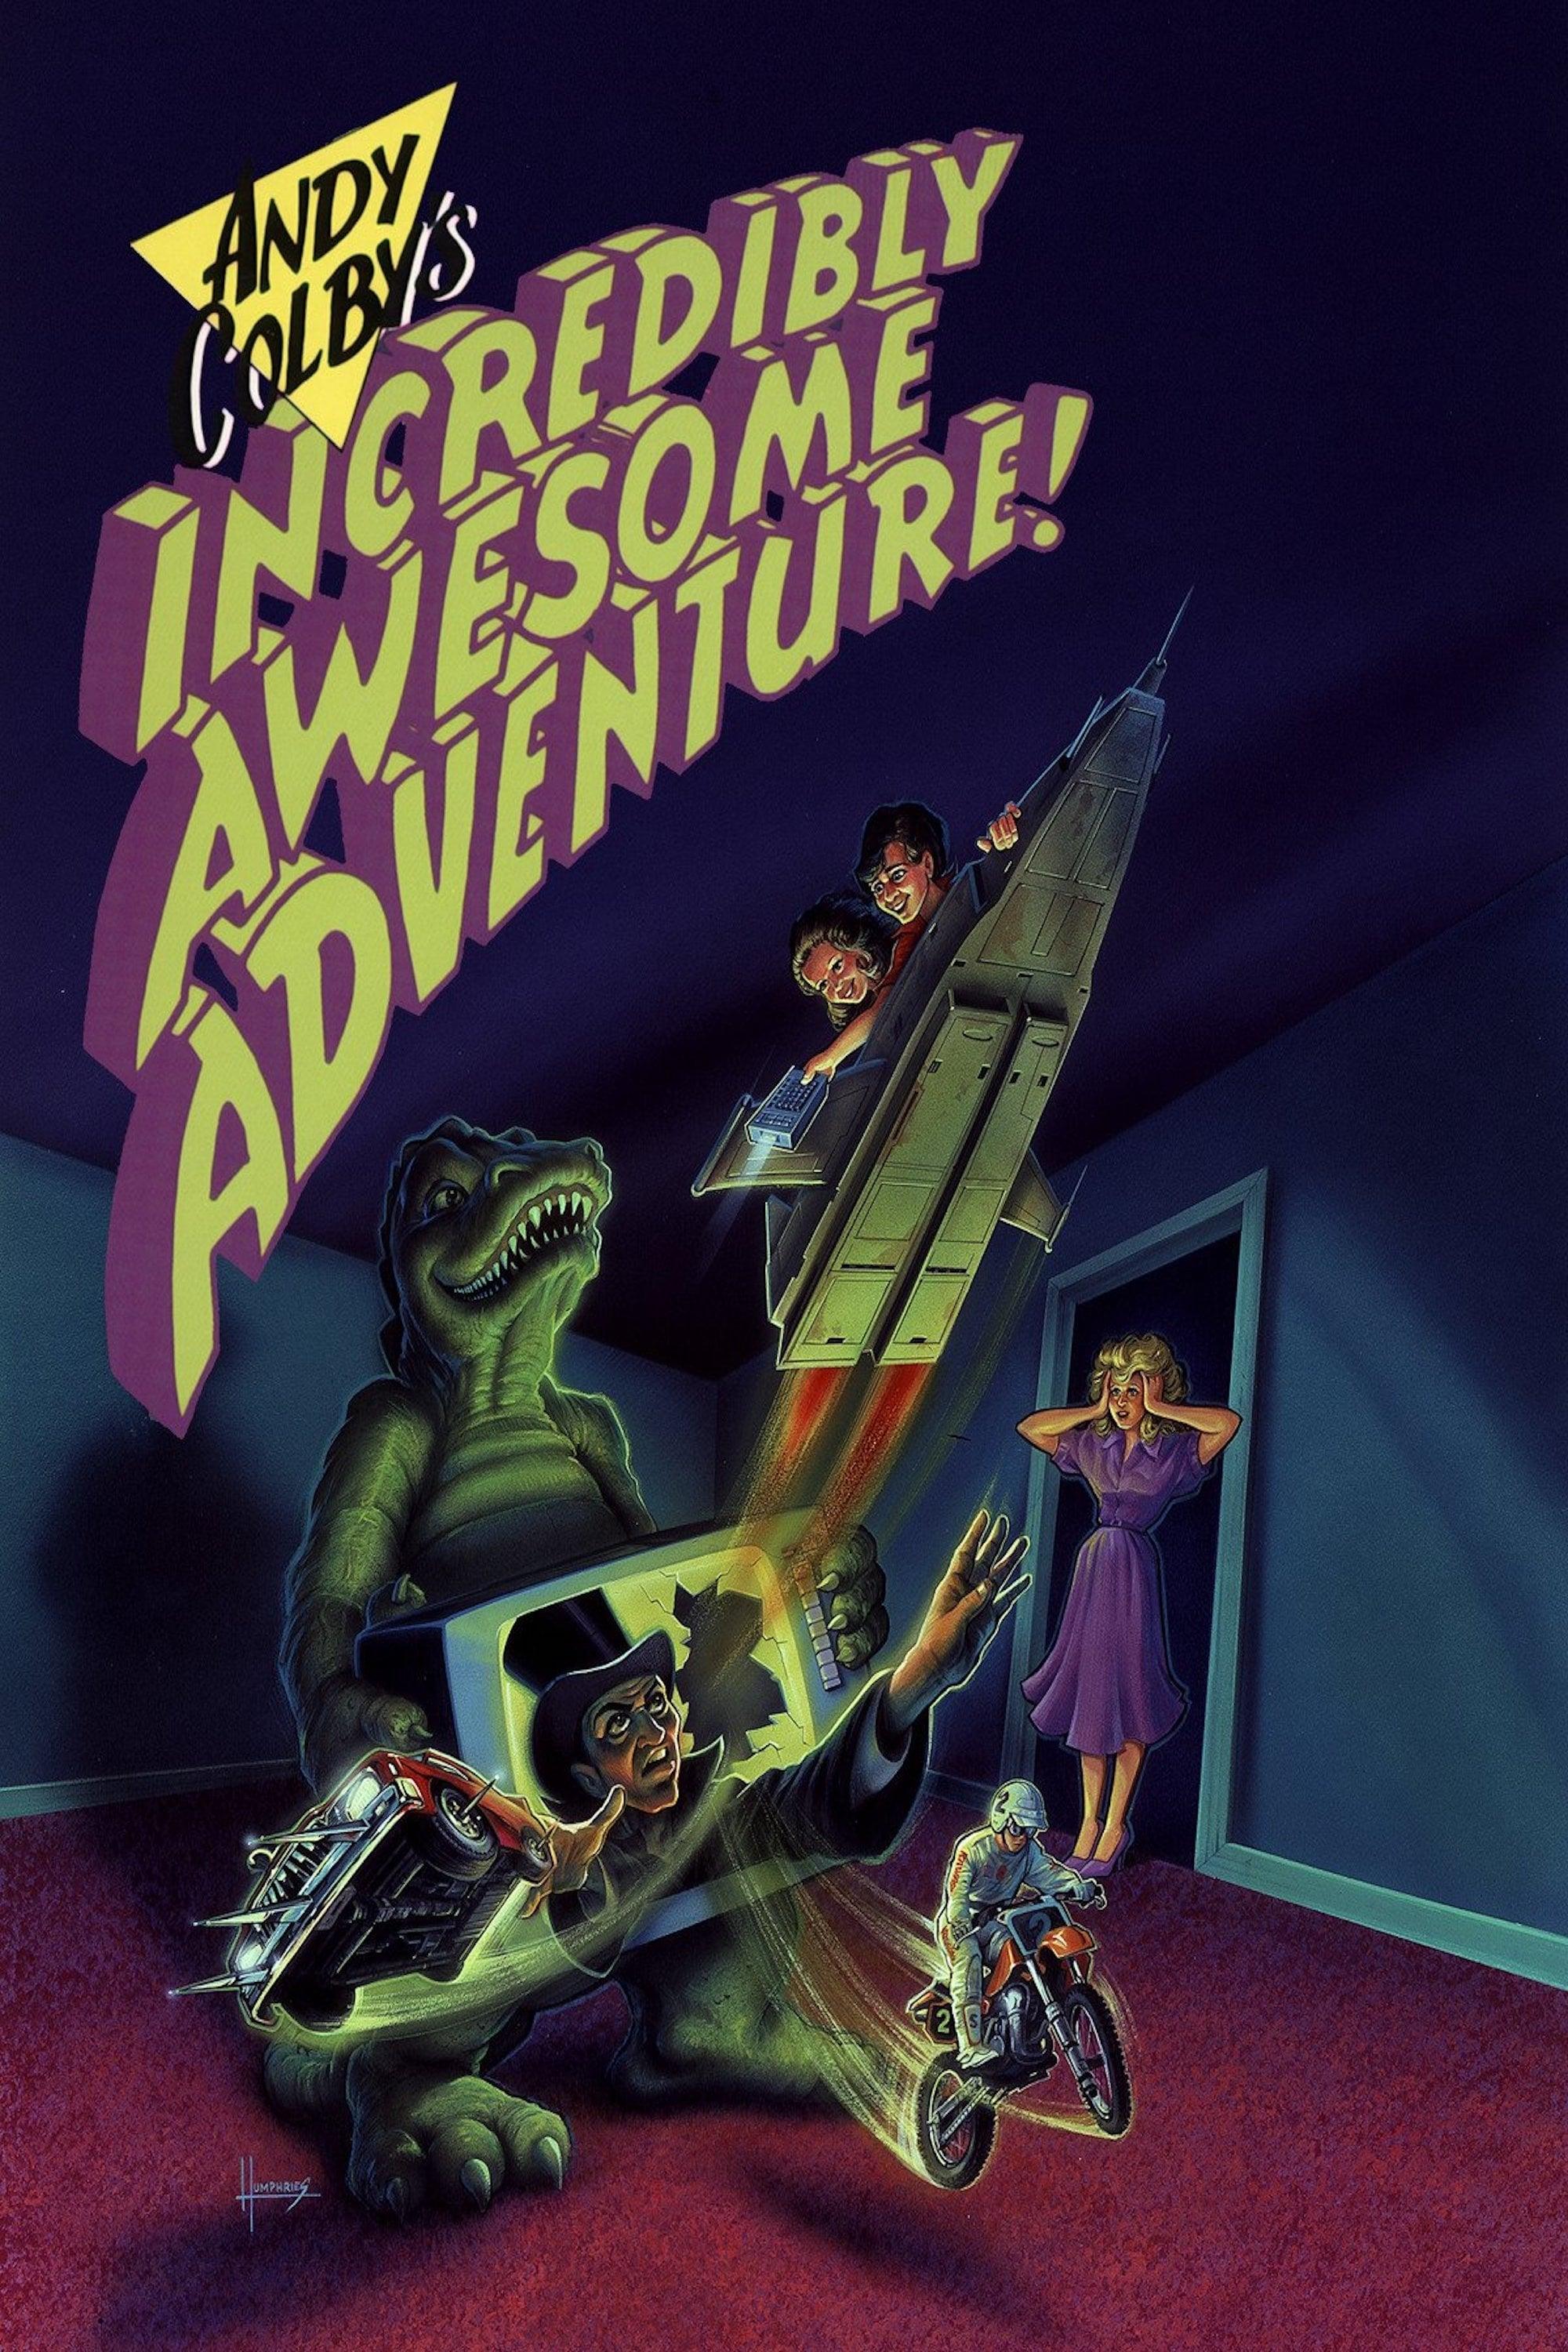 Andy Colby’s Incredibly Awesome Adventure poster